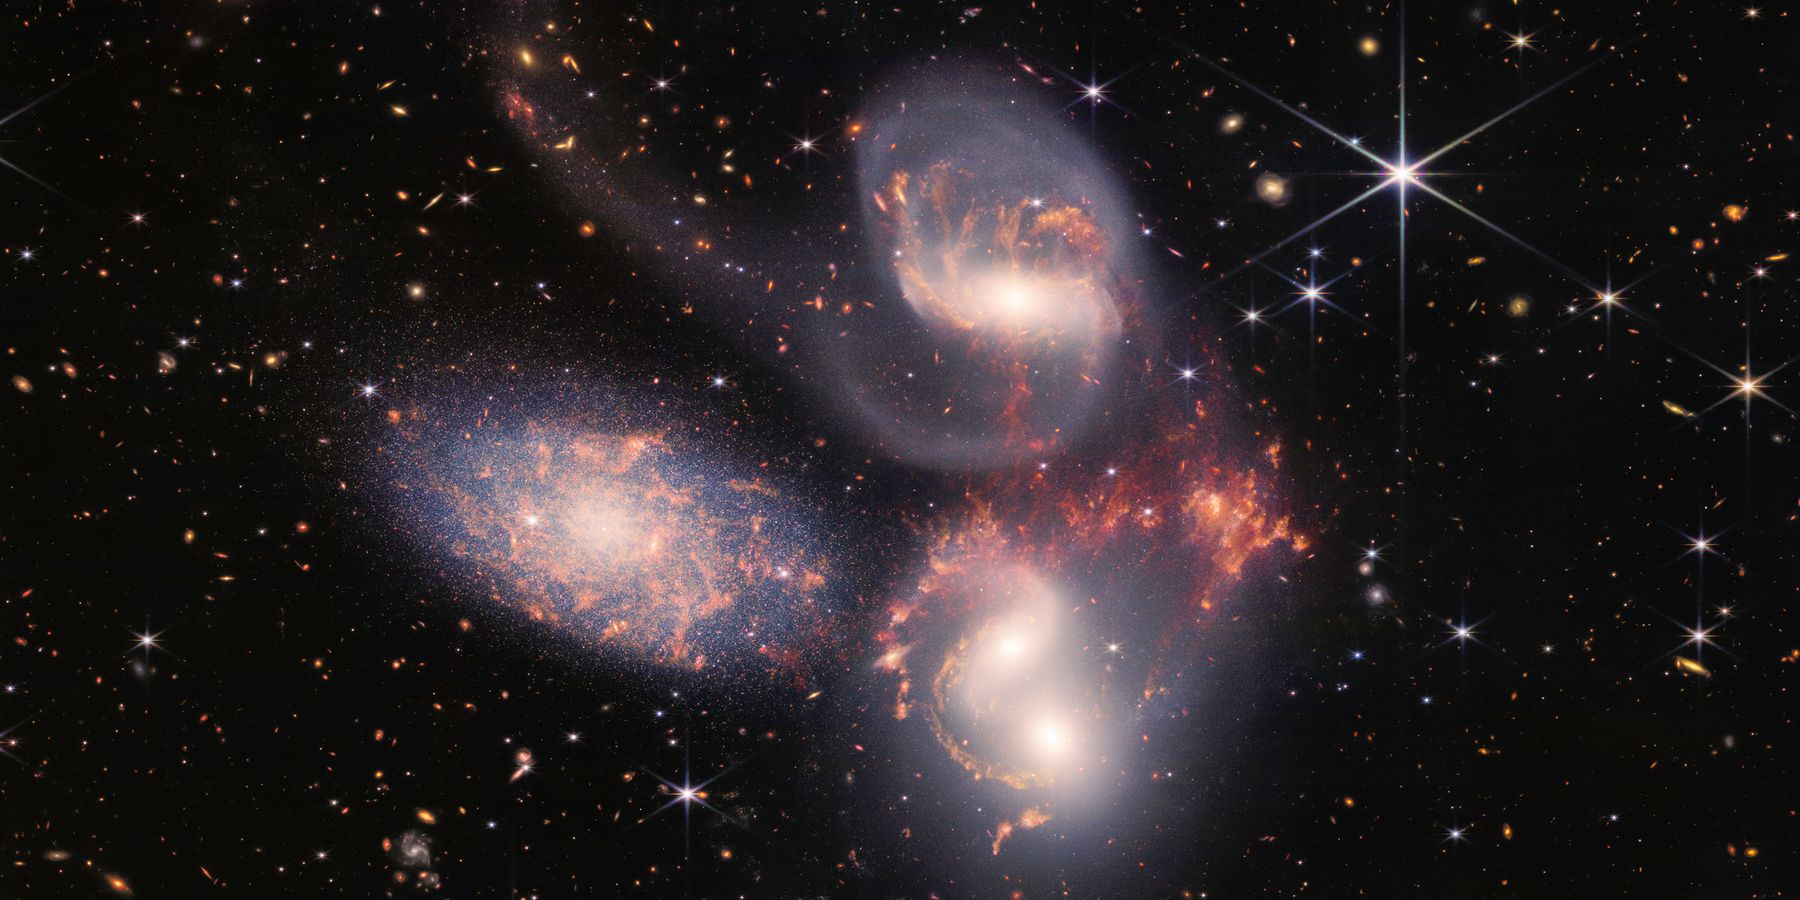 Stephan’s Quintet captured by the Webb space telescope